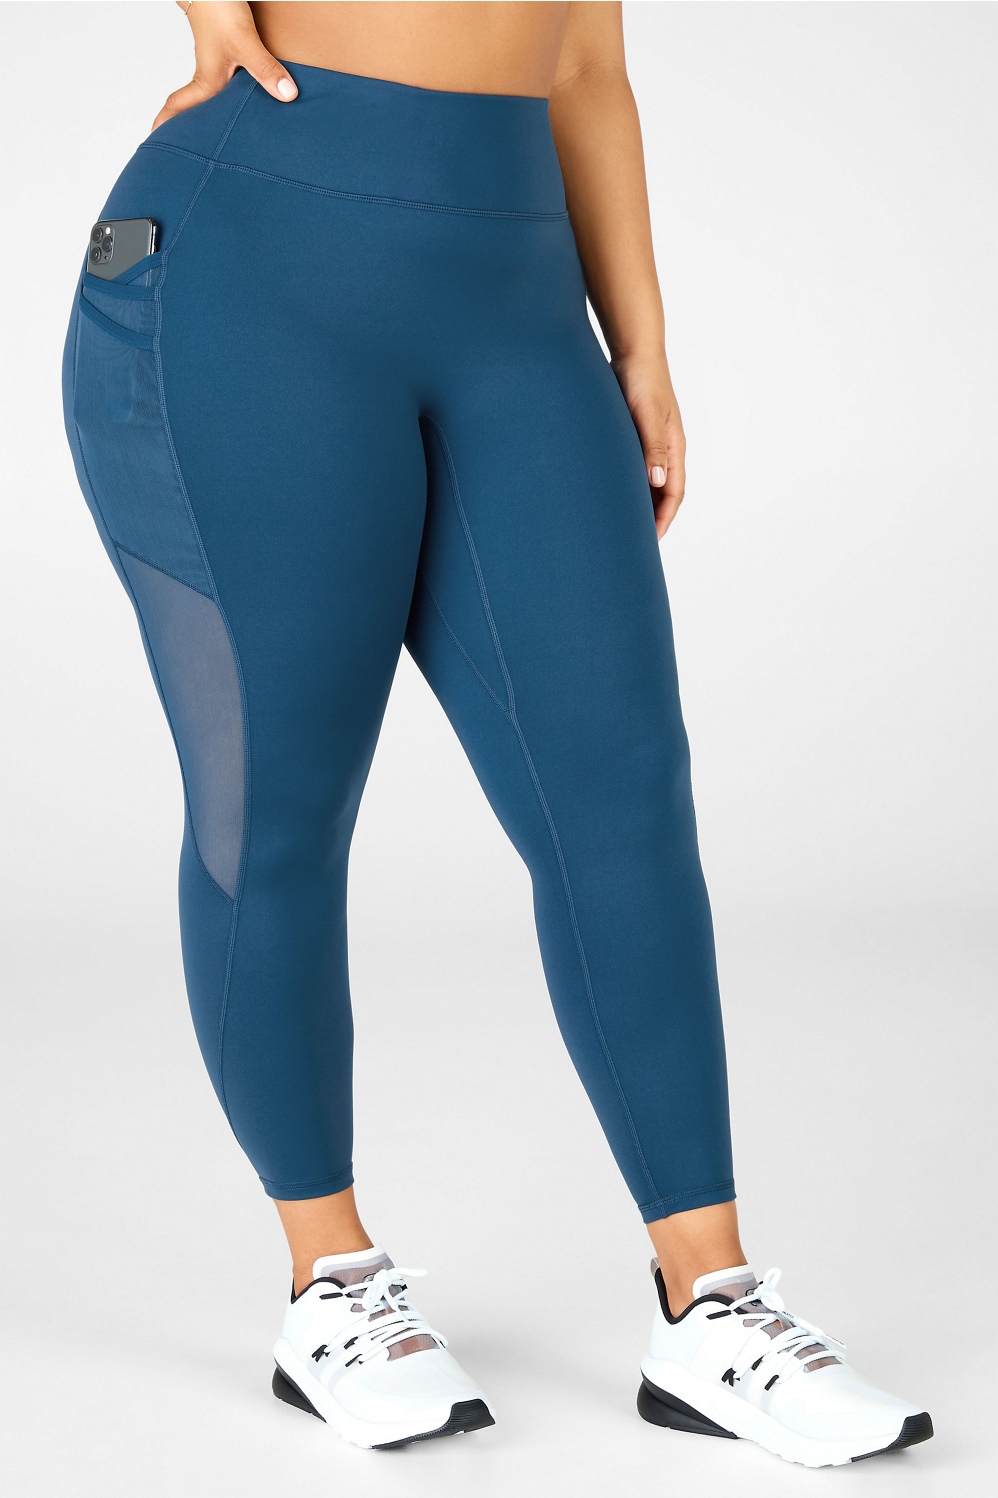 Buy Yoga Pants Best High Waist Sports Leggings with Pockets Best Squat  Proof Leggings Workout Leggings for Women Running Leggings with Pockets Best  Yoga Pants (S, Black) at Amazon.in